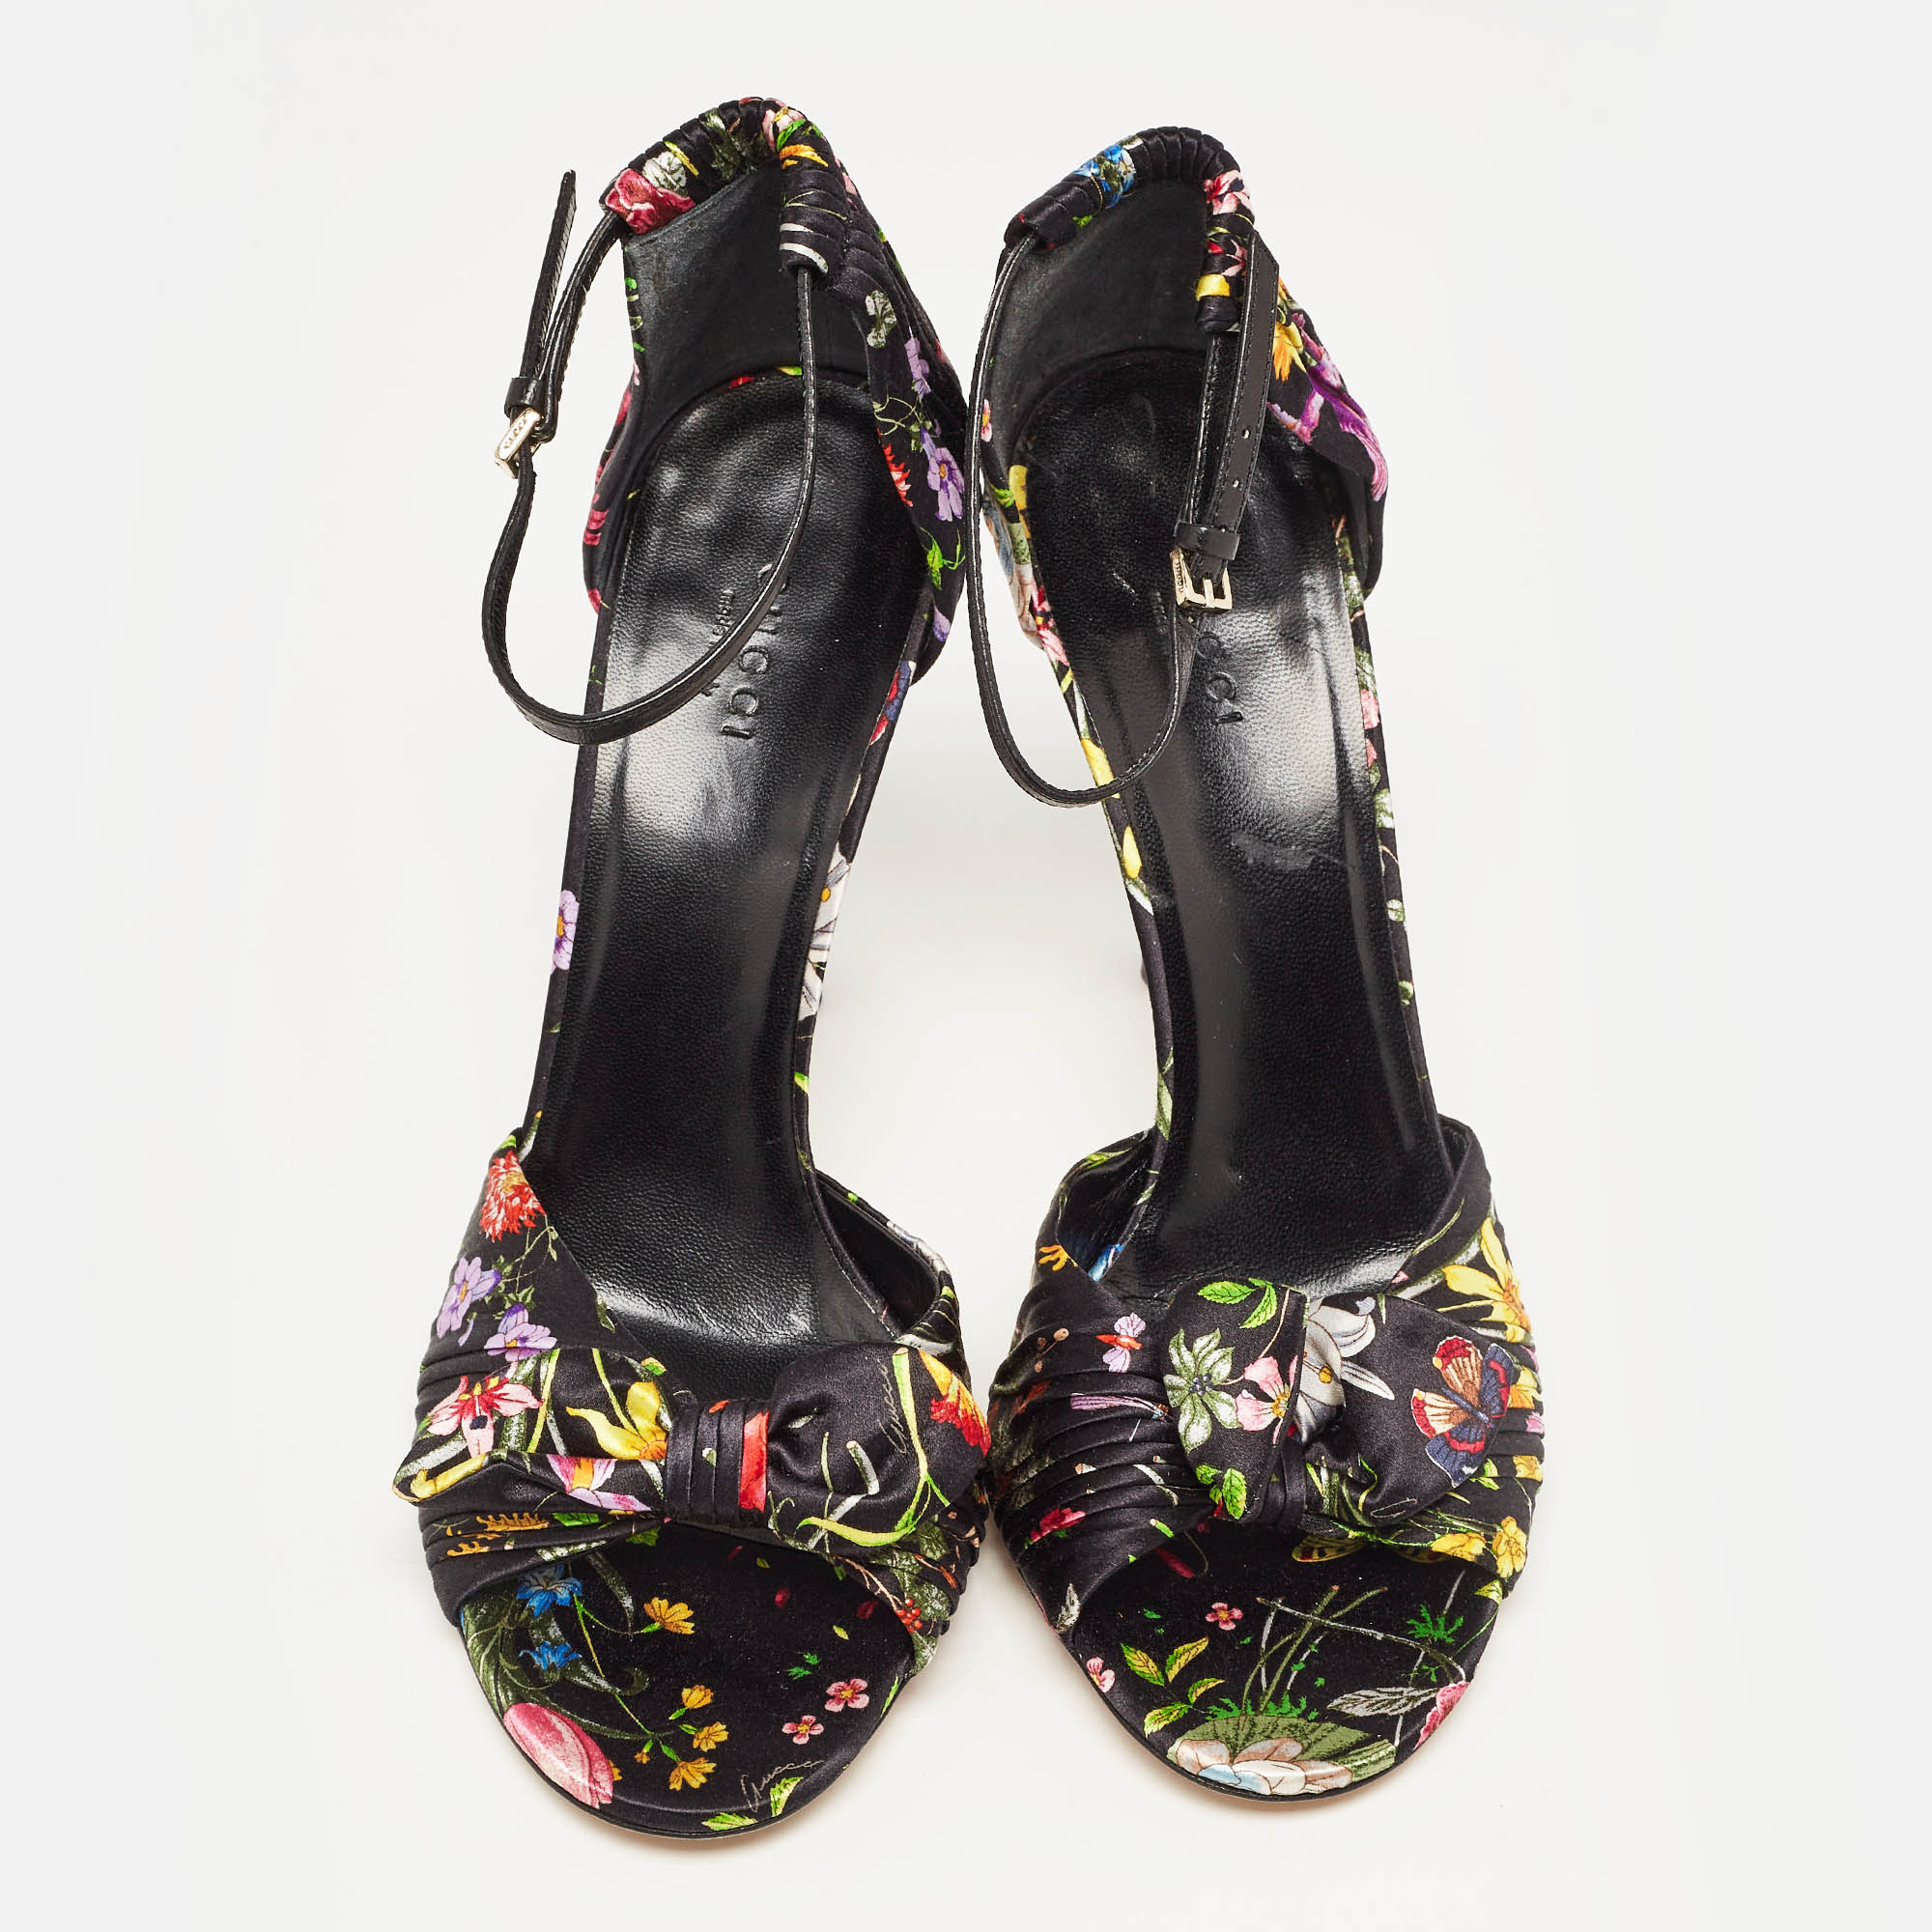 Gucci Black Floral Print Pleated Satin Bow Ankle Strap Sandals Size 39